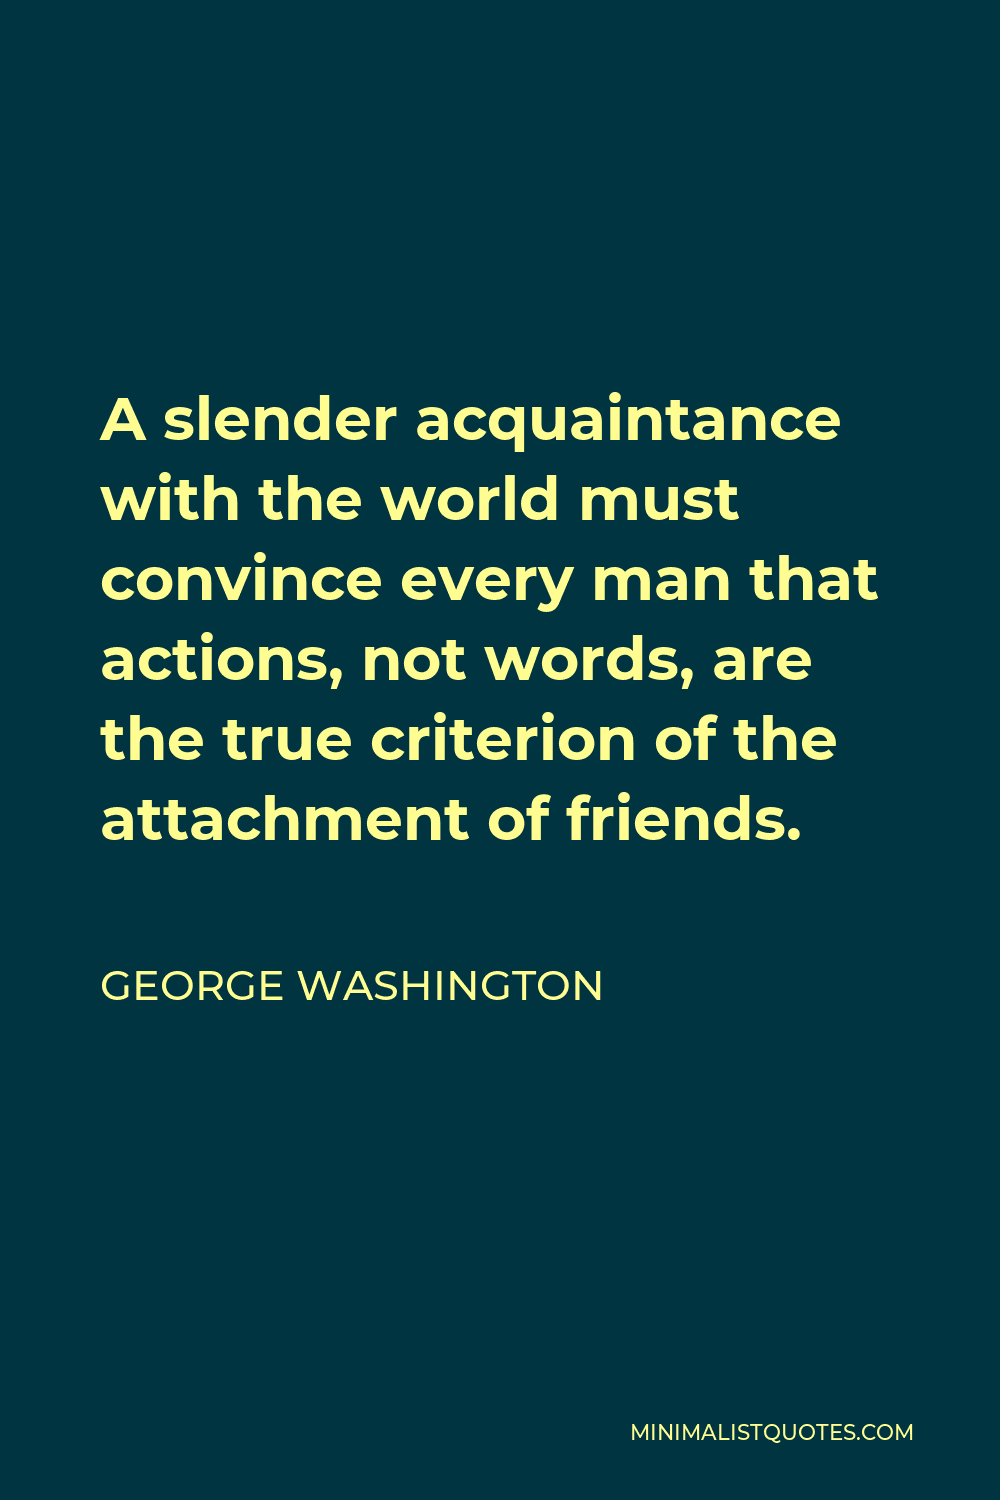 George Washington Quote - A slender acquaintance with the world must convince every man that actions, not words, are the true criterion of the attachment of friends.